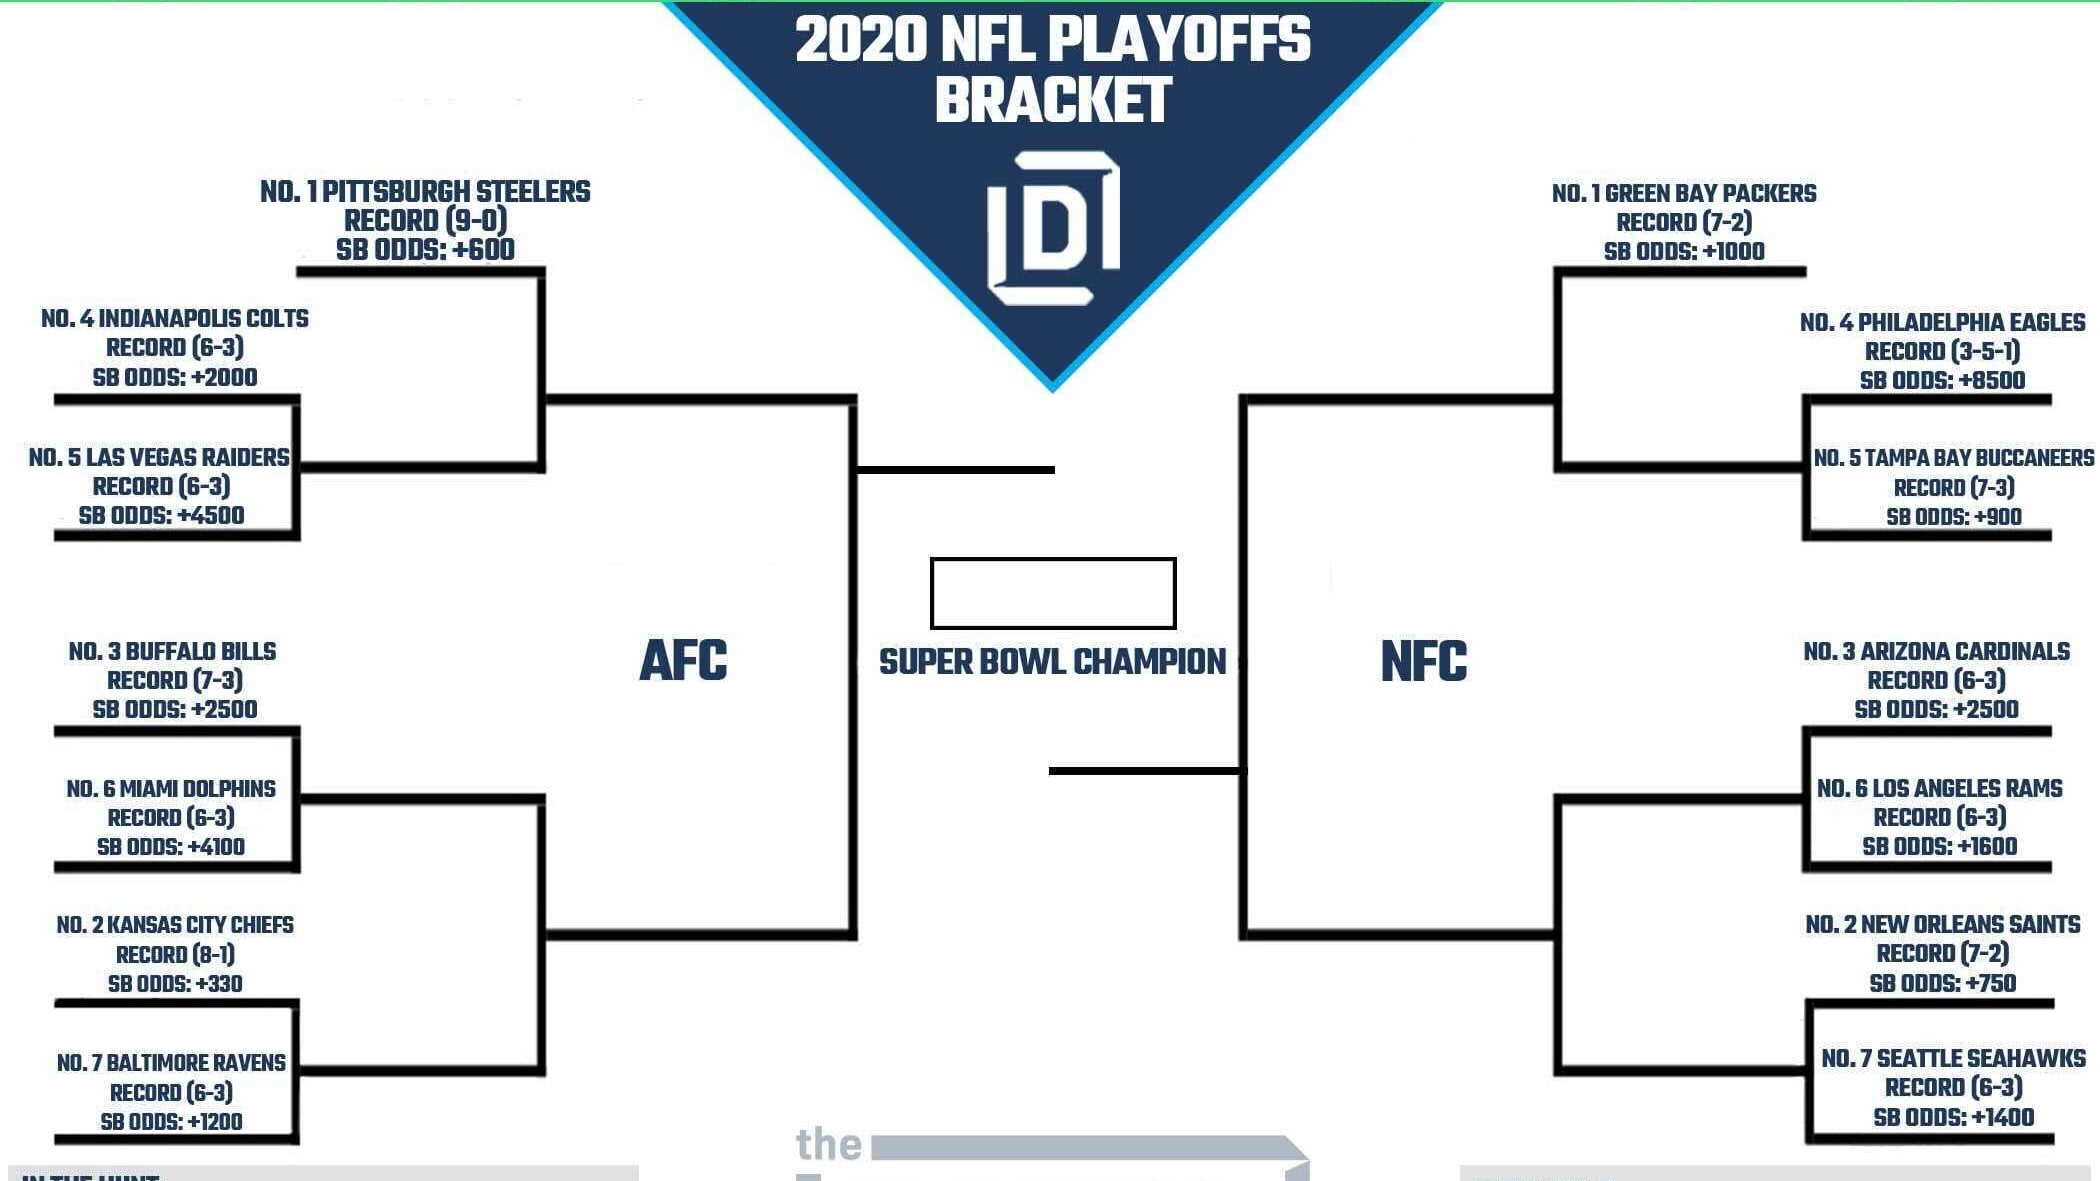 NFL Playoff Picture and 2020 Bracket for NFC and AFC Heading Into